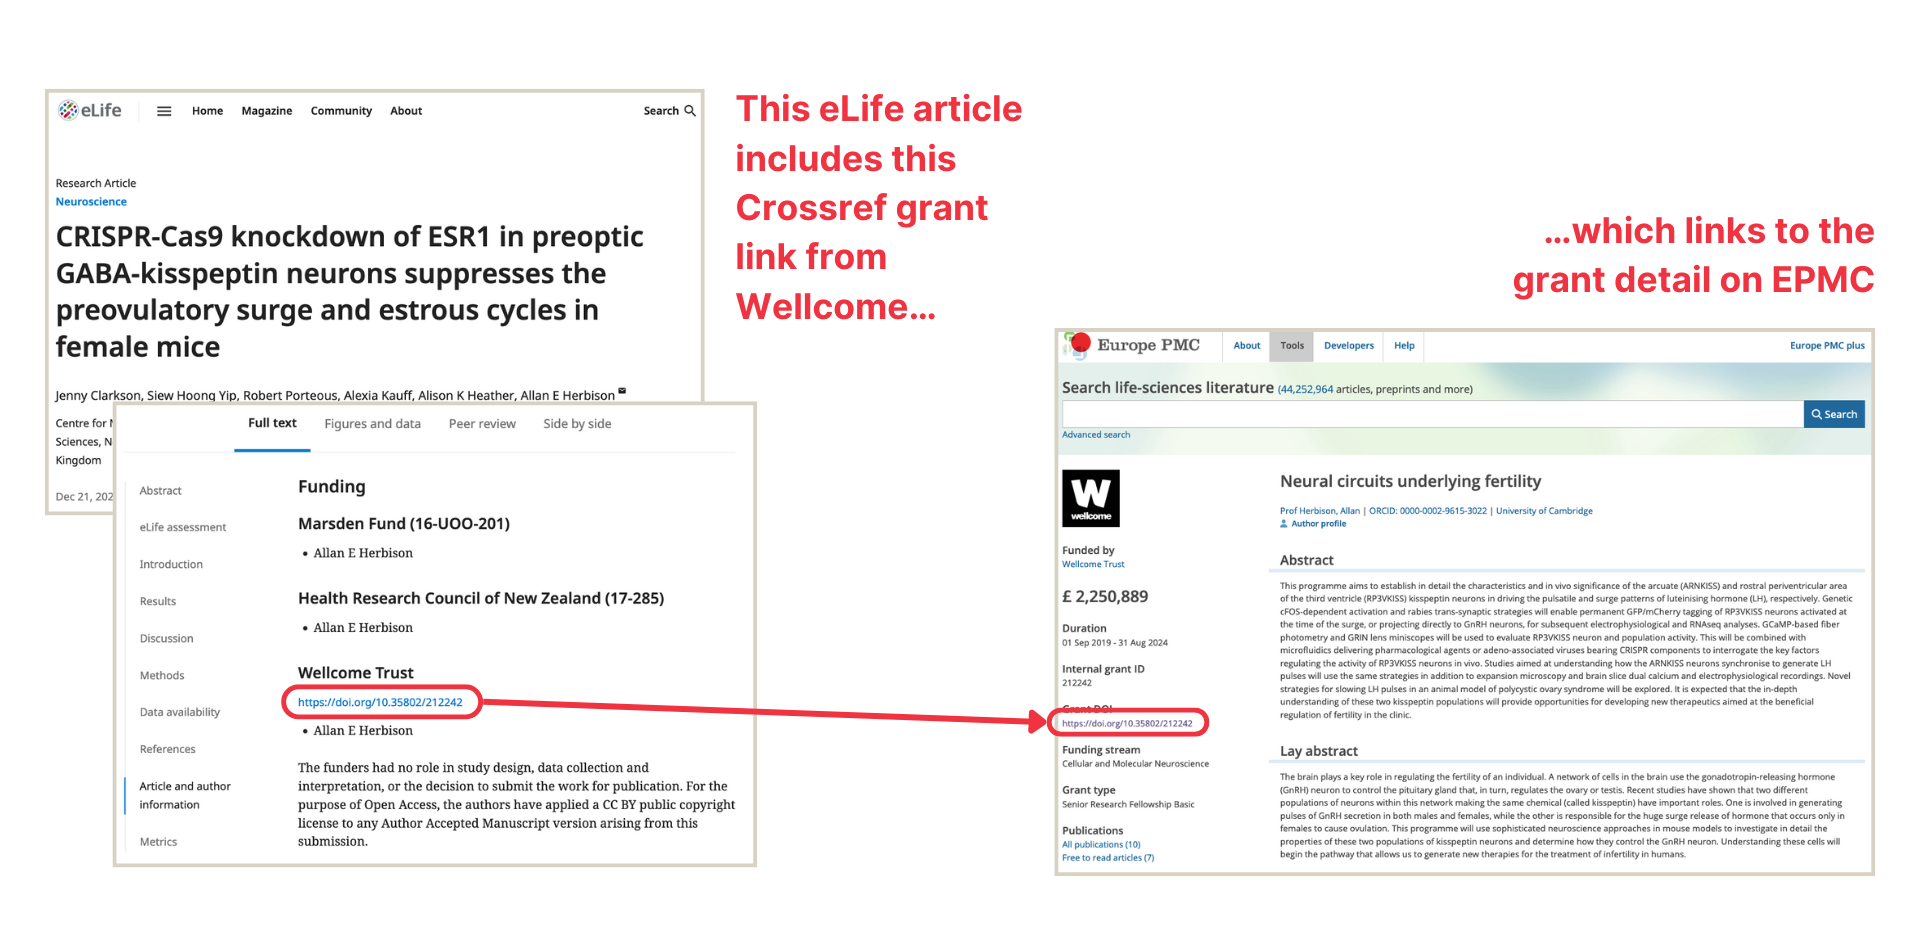 screen shots of the eLife article showing their link to the unique link created by Wellcome as part of the Crossref Grant Linking System